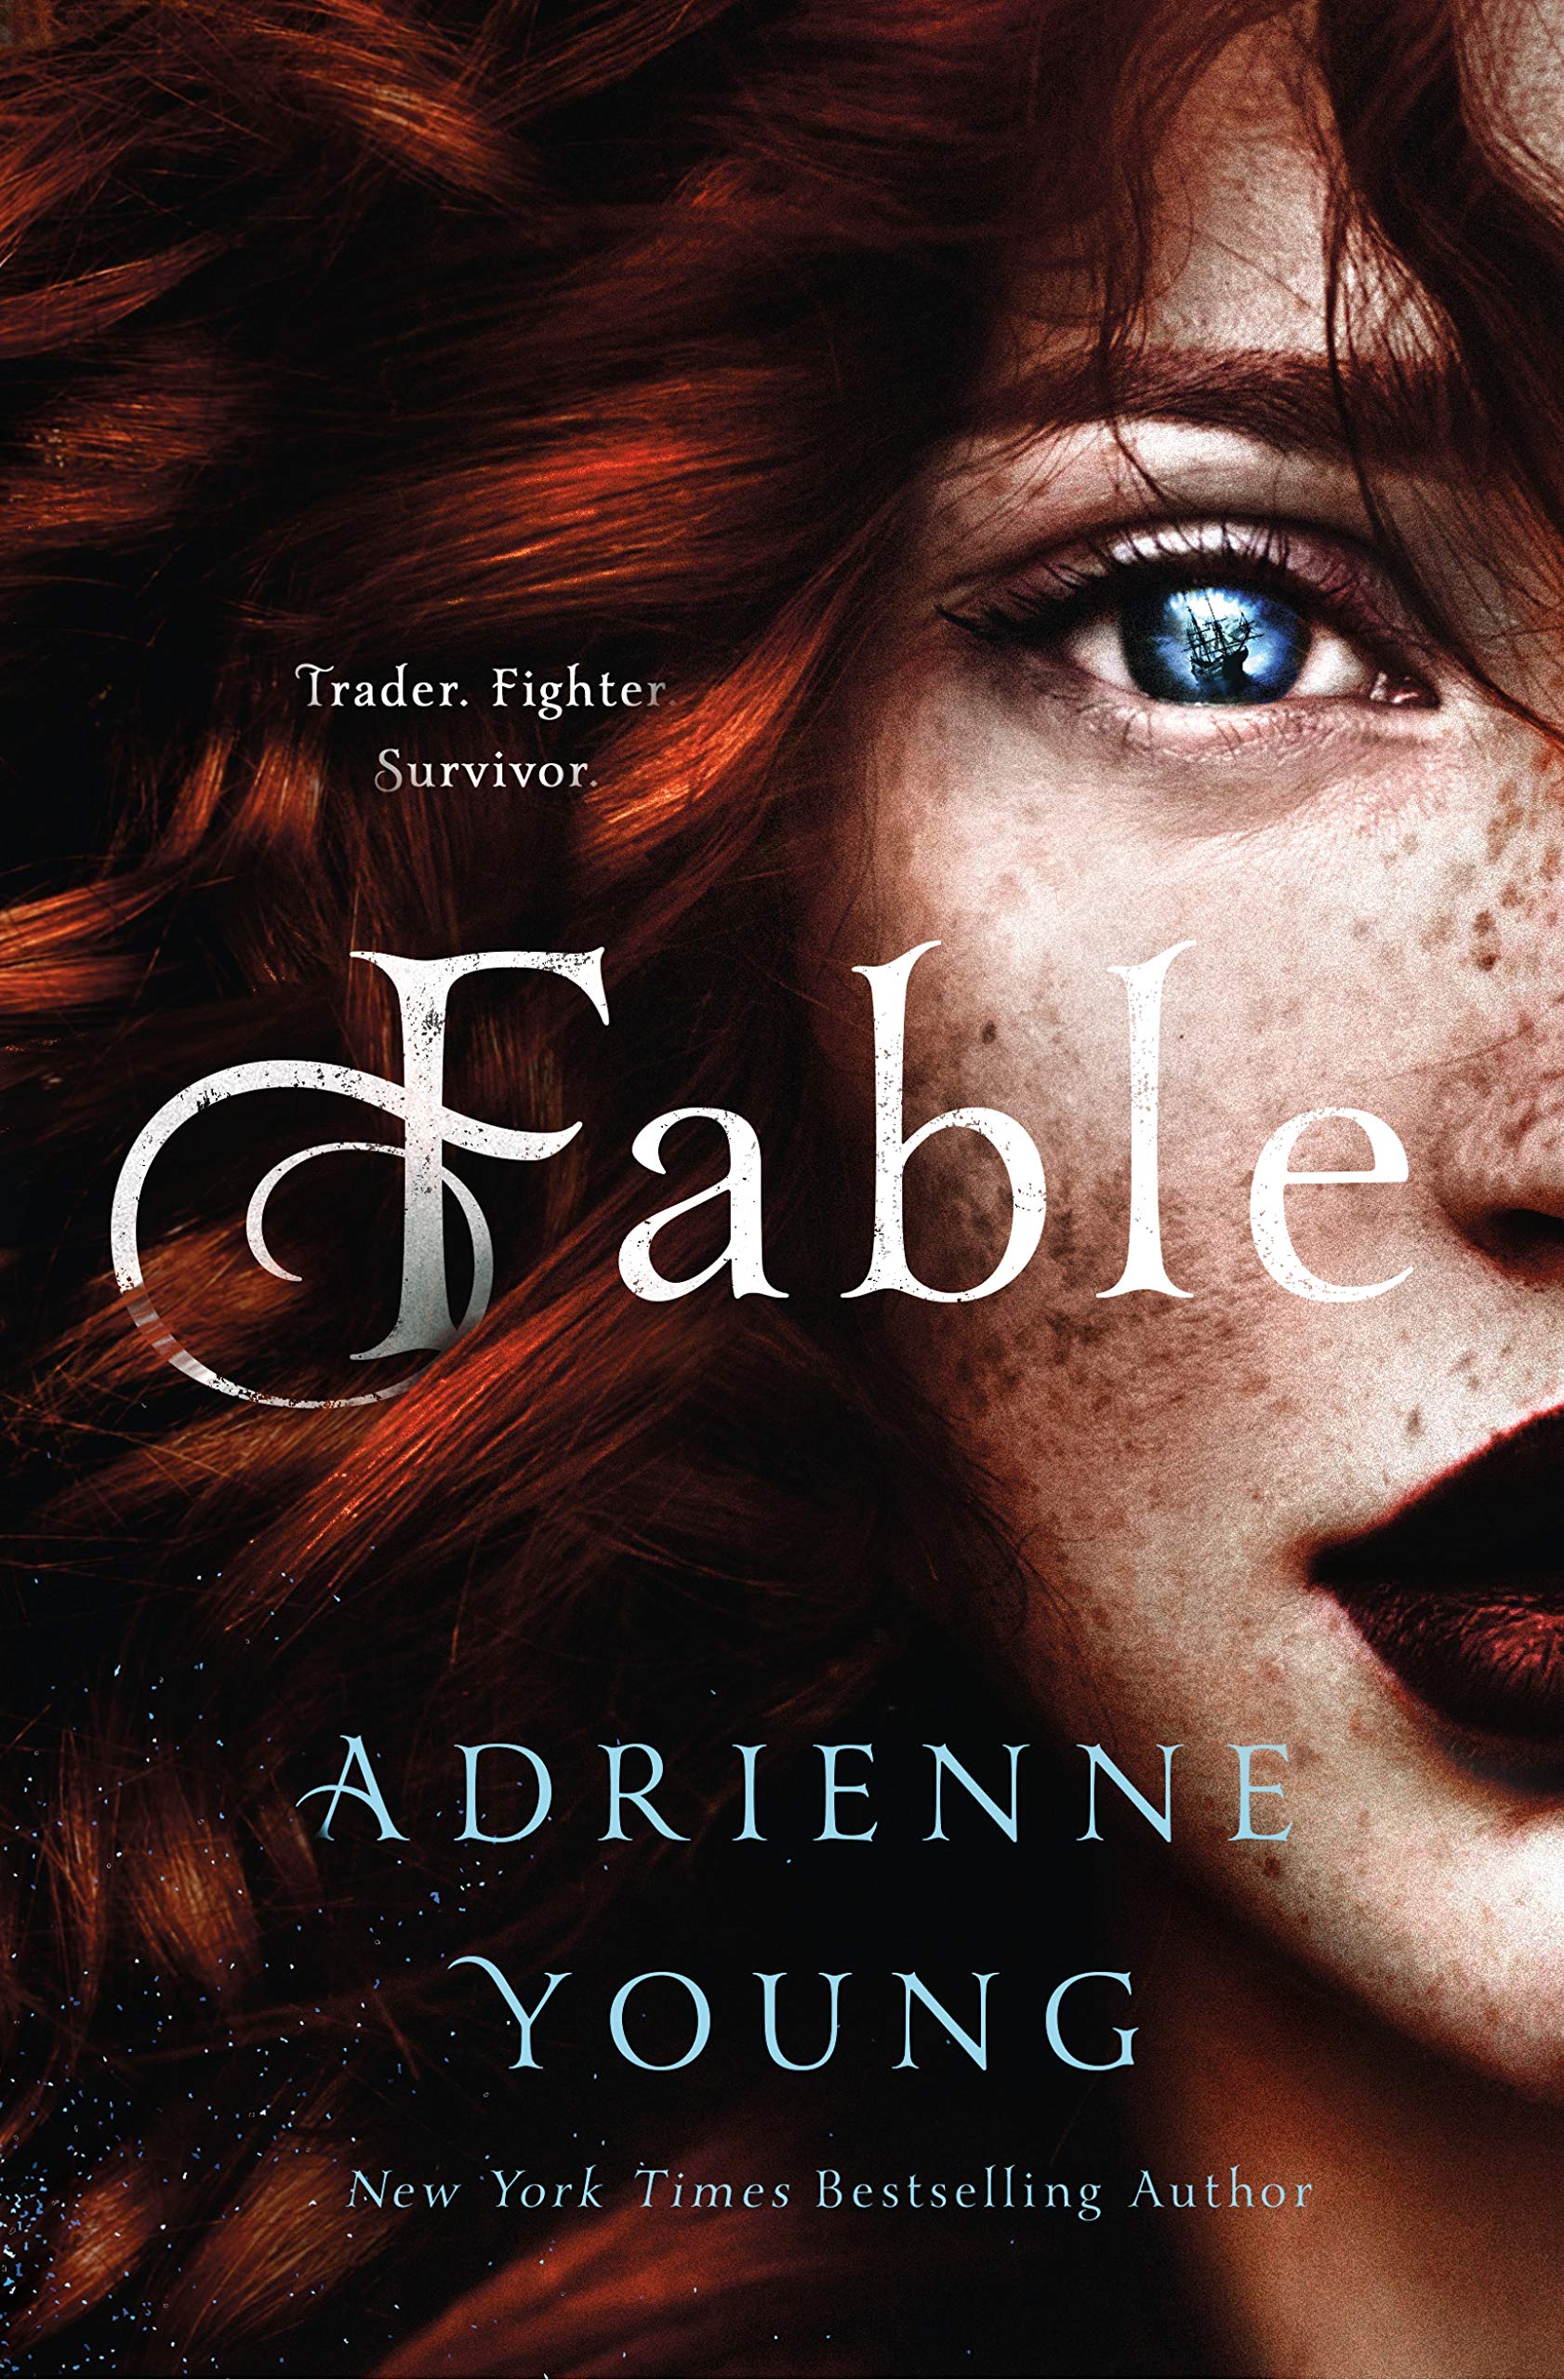 adrienne young fable series